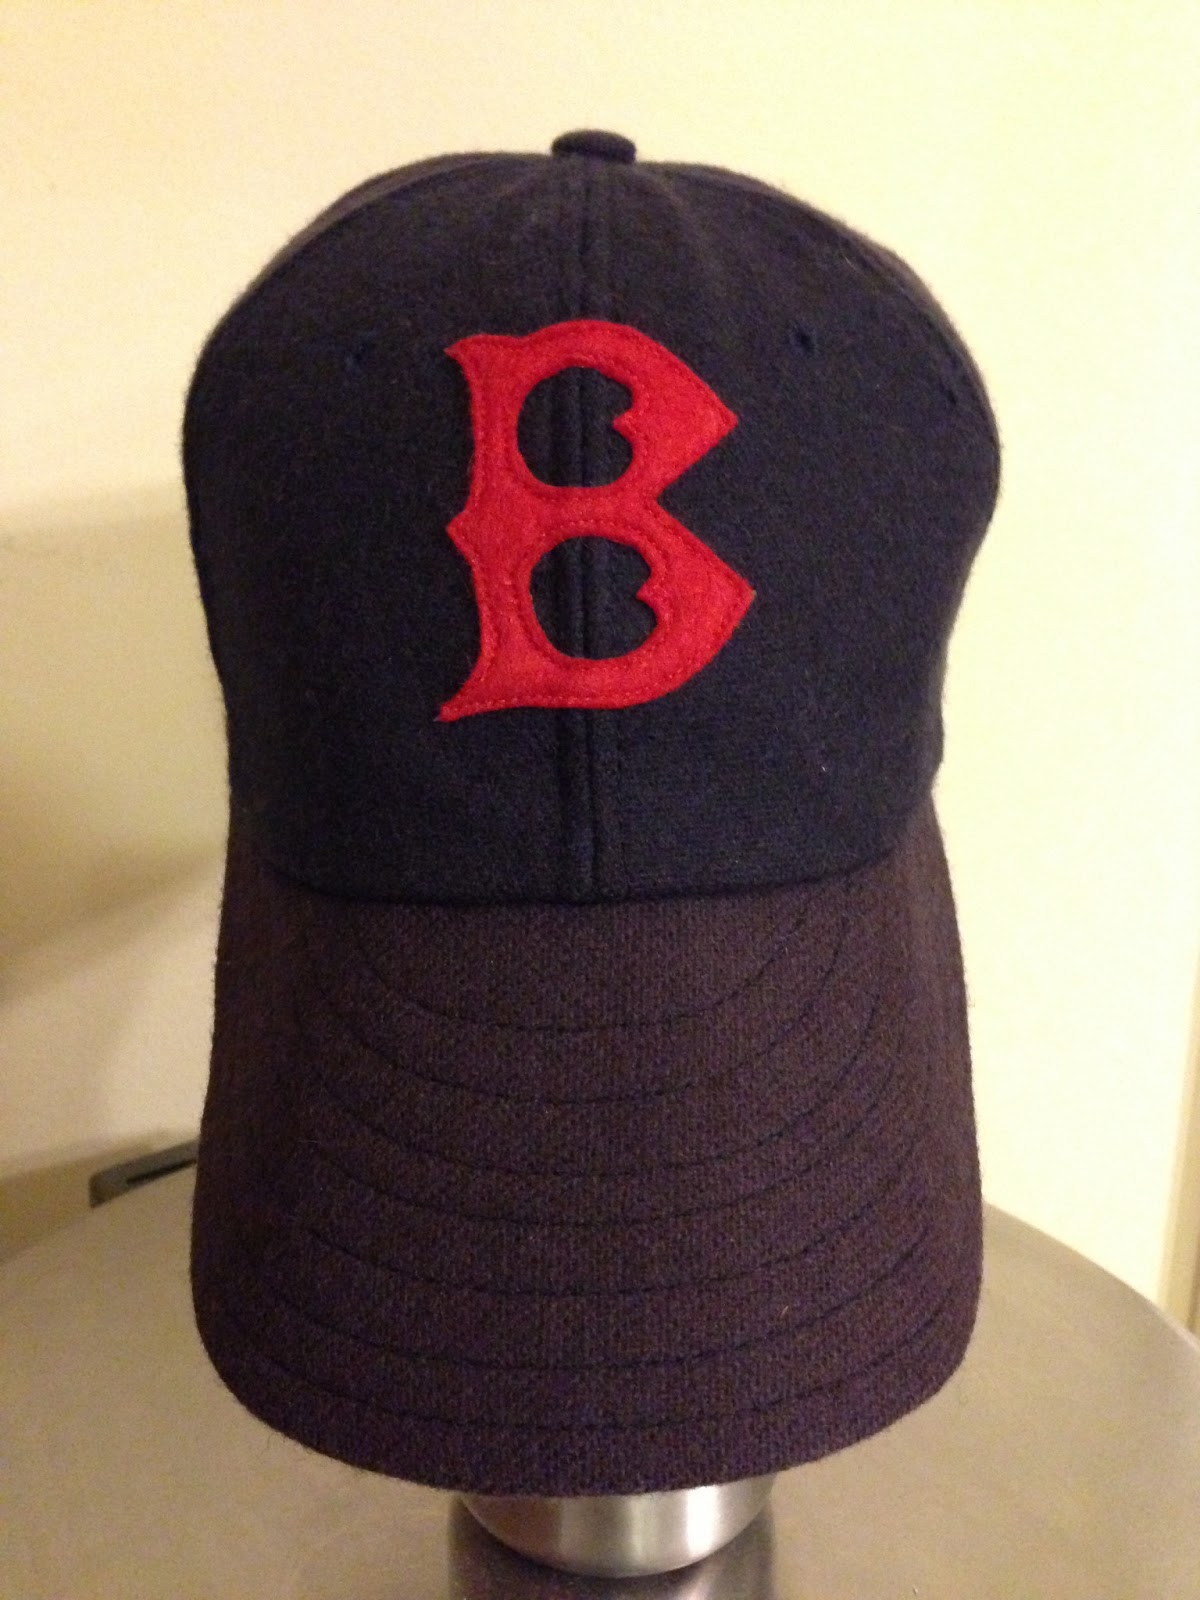 Cooperstown Ball Cap Co. Caps: 1936 Boston Red Sox